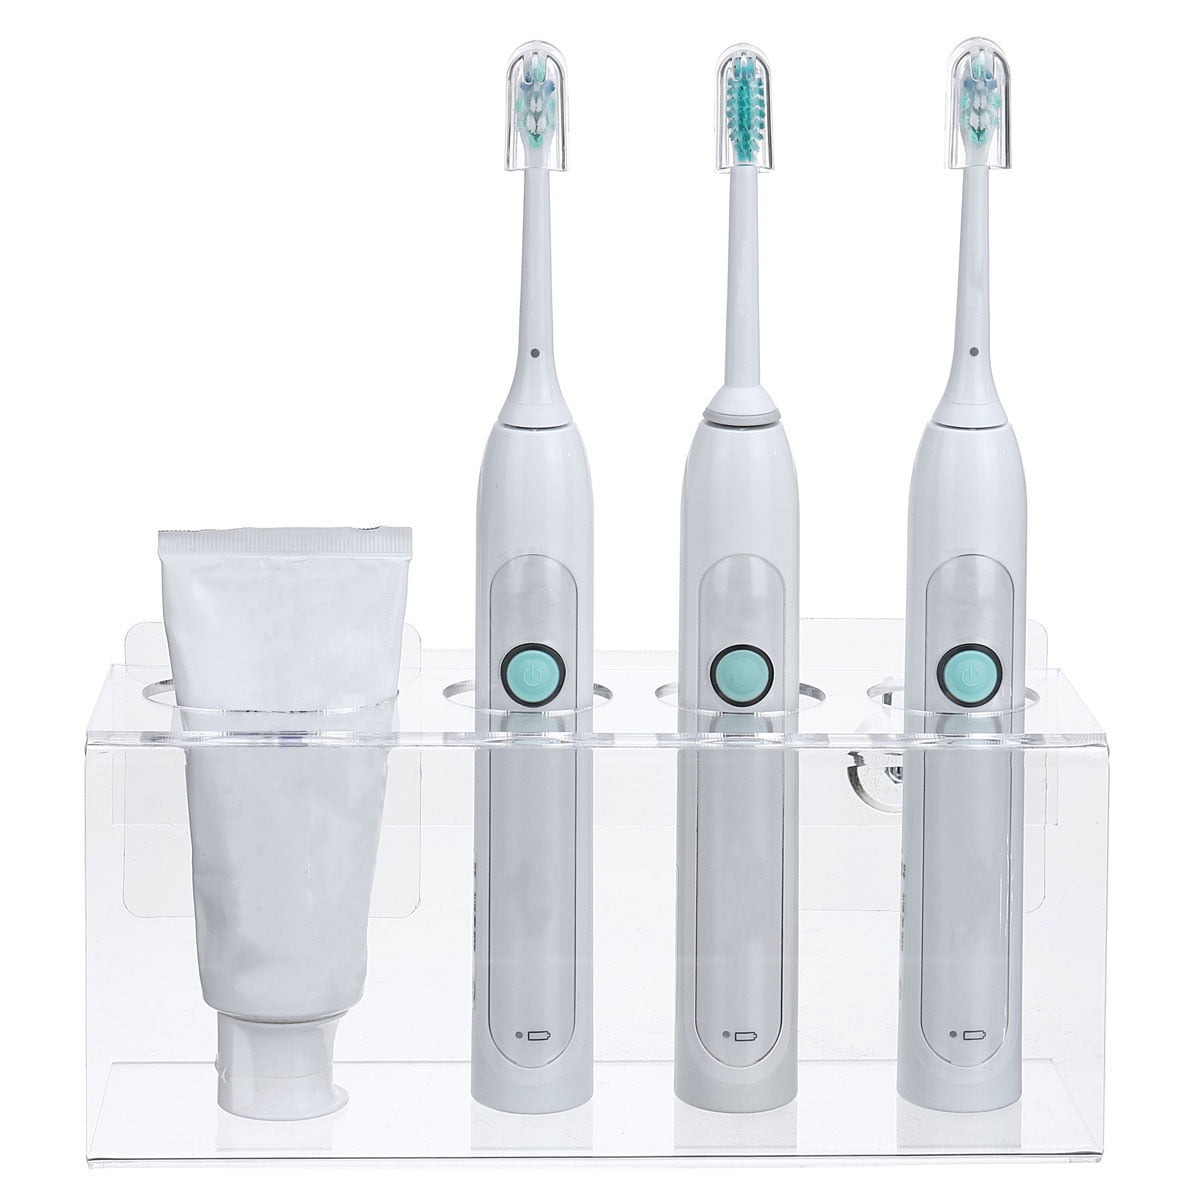 Wall Mounted Electric Toothbrush Holder & Toothpaste Holder Bathroom Organiser 